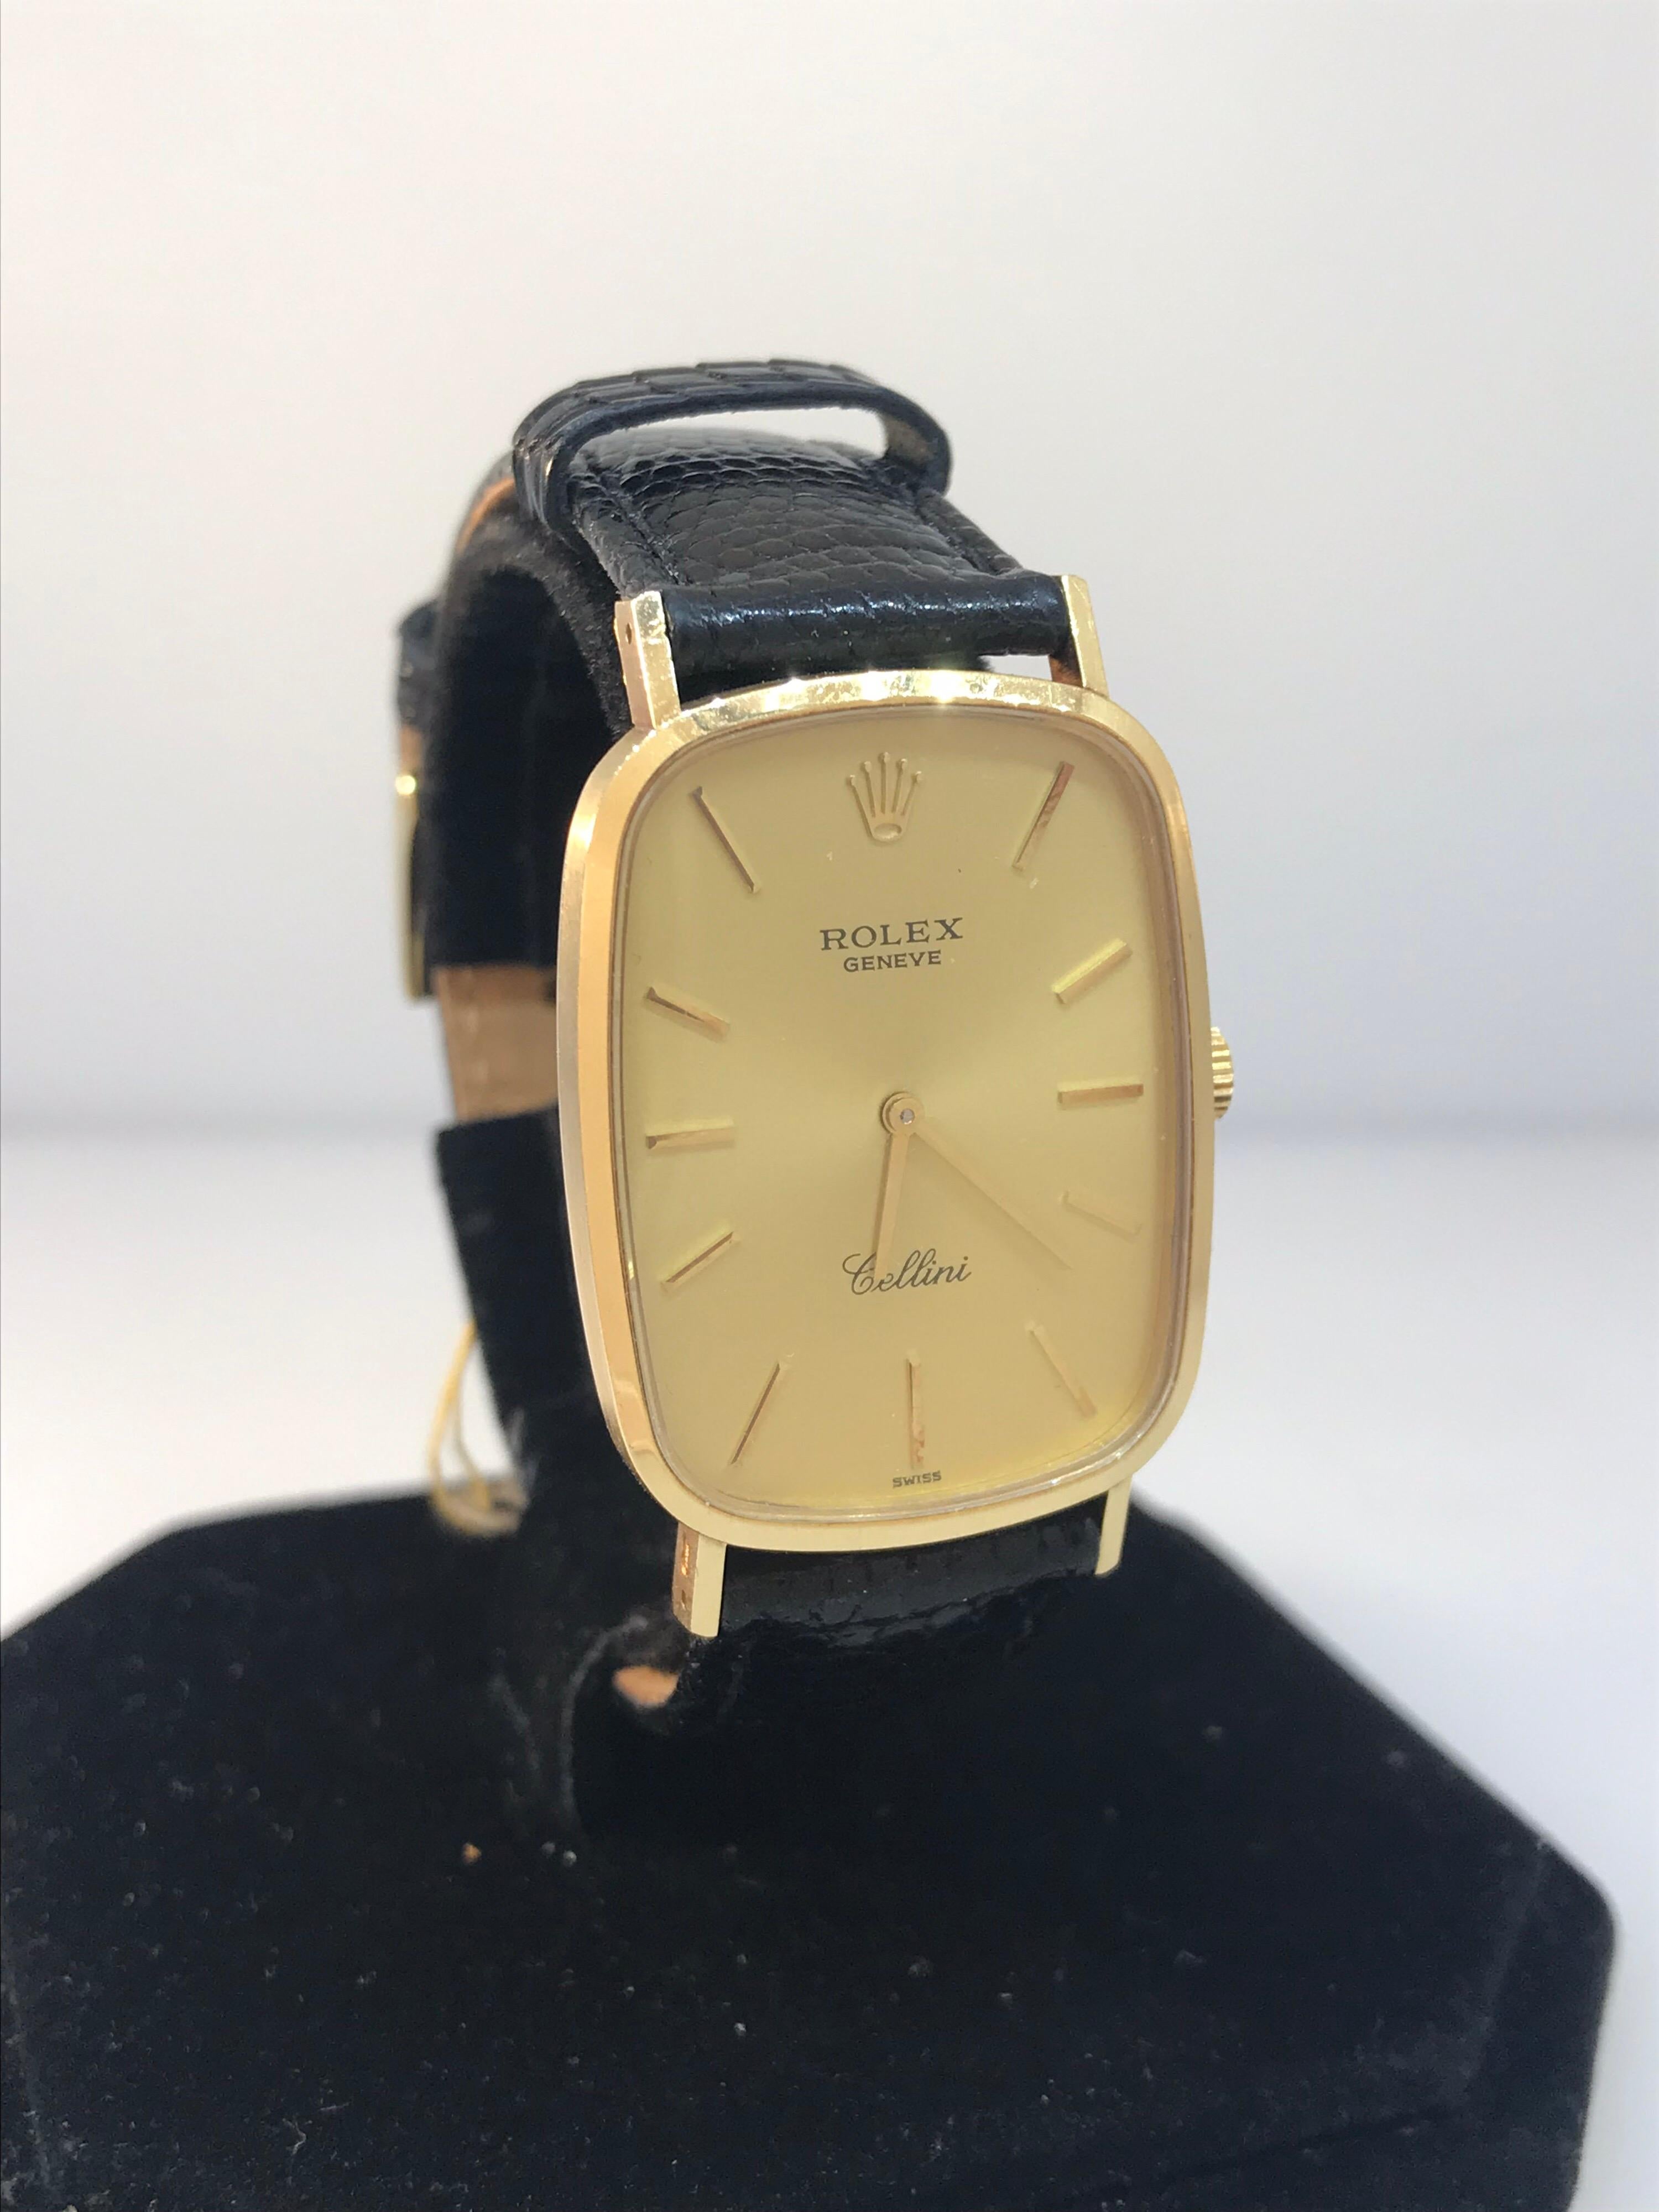 Rolex Cellini Vintage Men's Watch

Model Number: 4113

100% Authentic

Pre owned in very good condition

Comes with a generic watch box

18 Karat Yellow Gold Case

Gold Dial

Index Hour Markers

Case Dimensions: 34mm x 26mm

Black Alligator leather